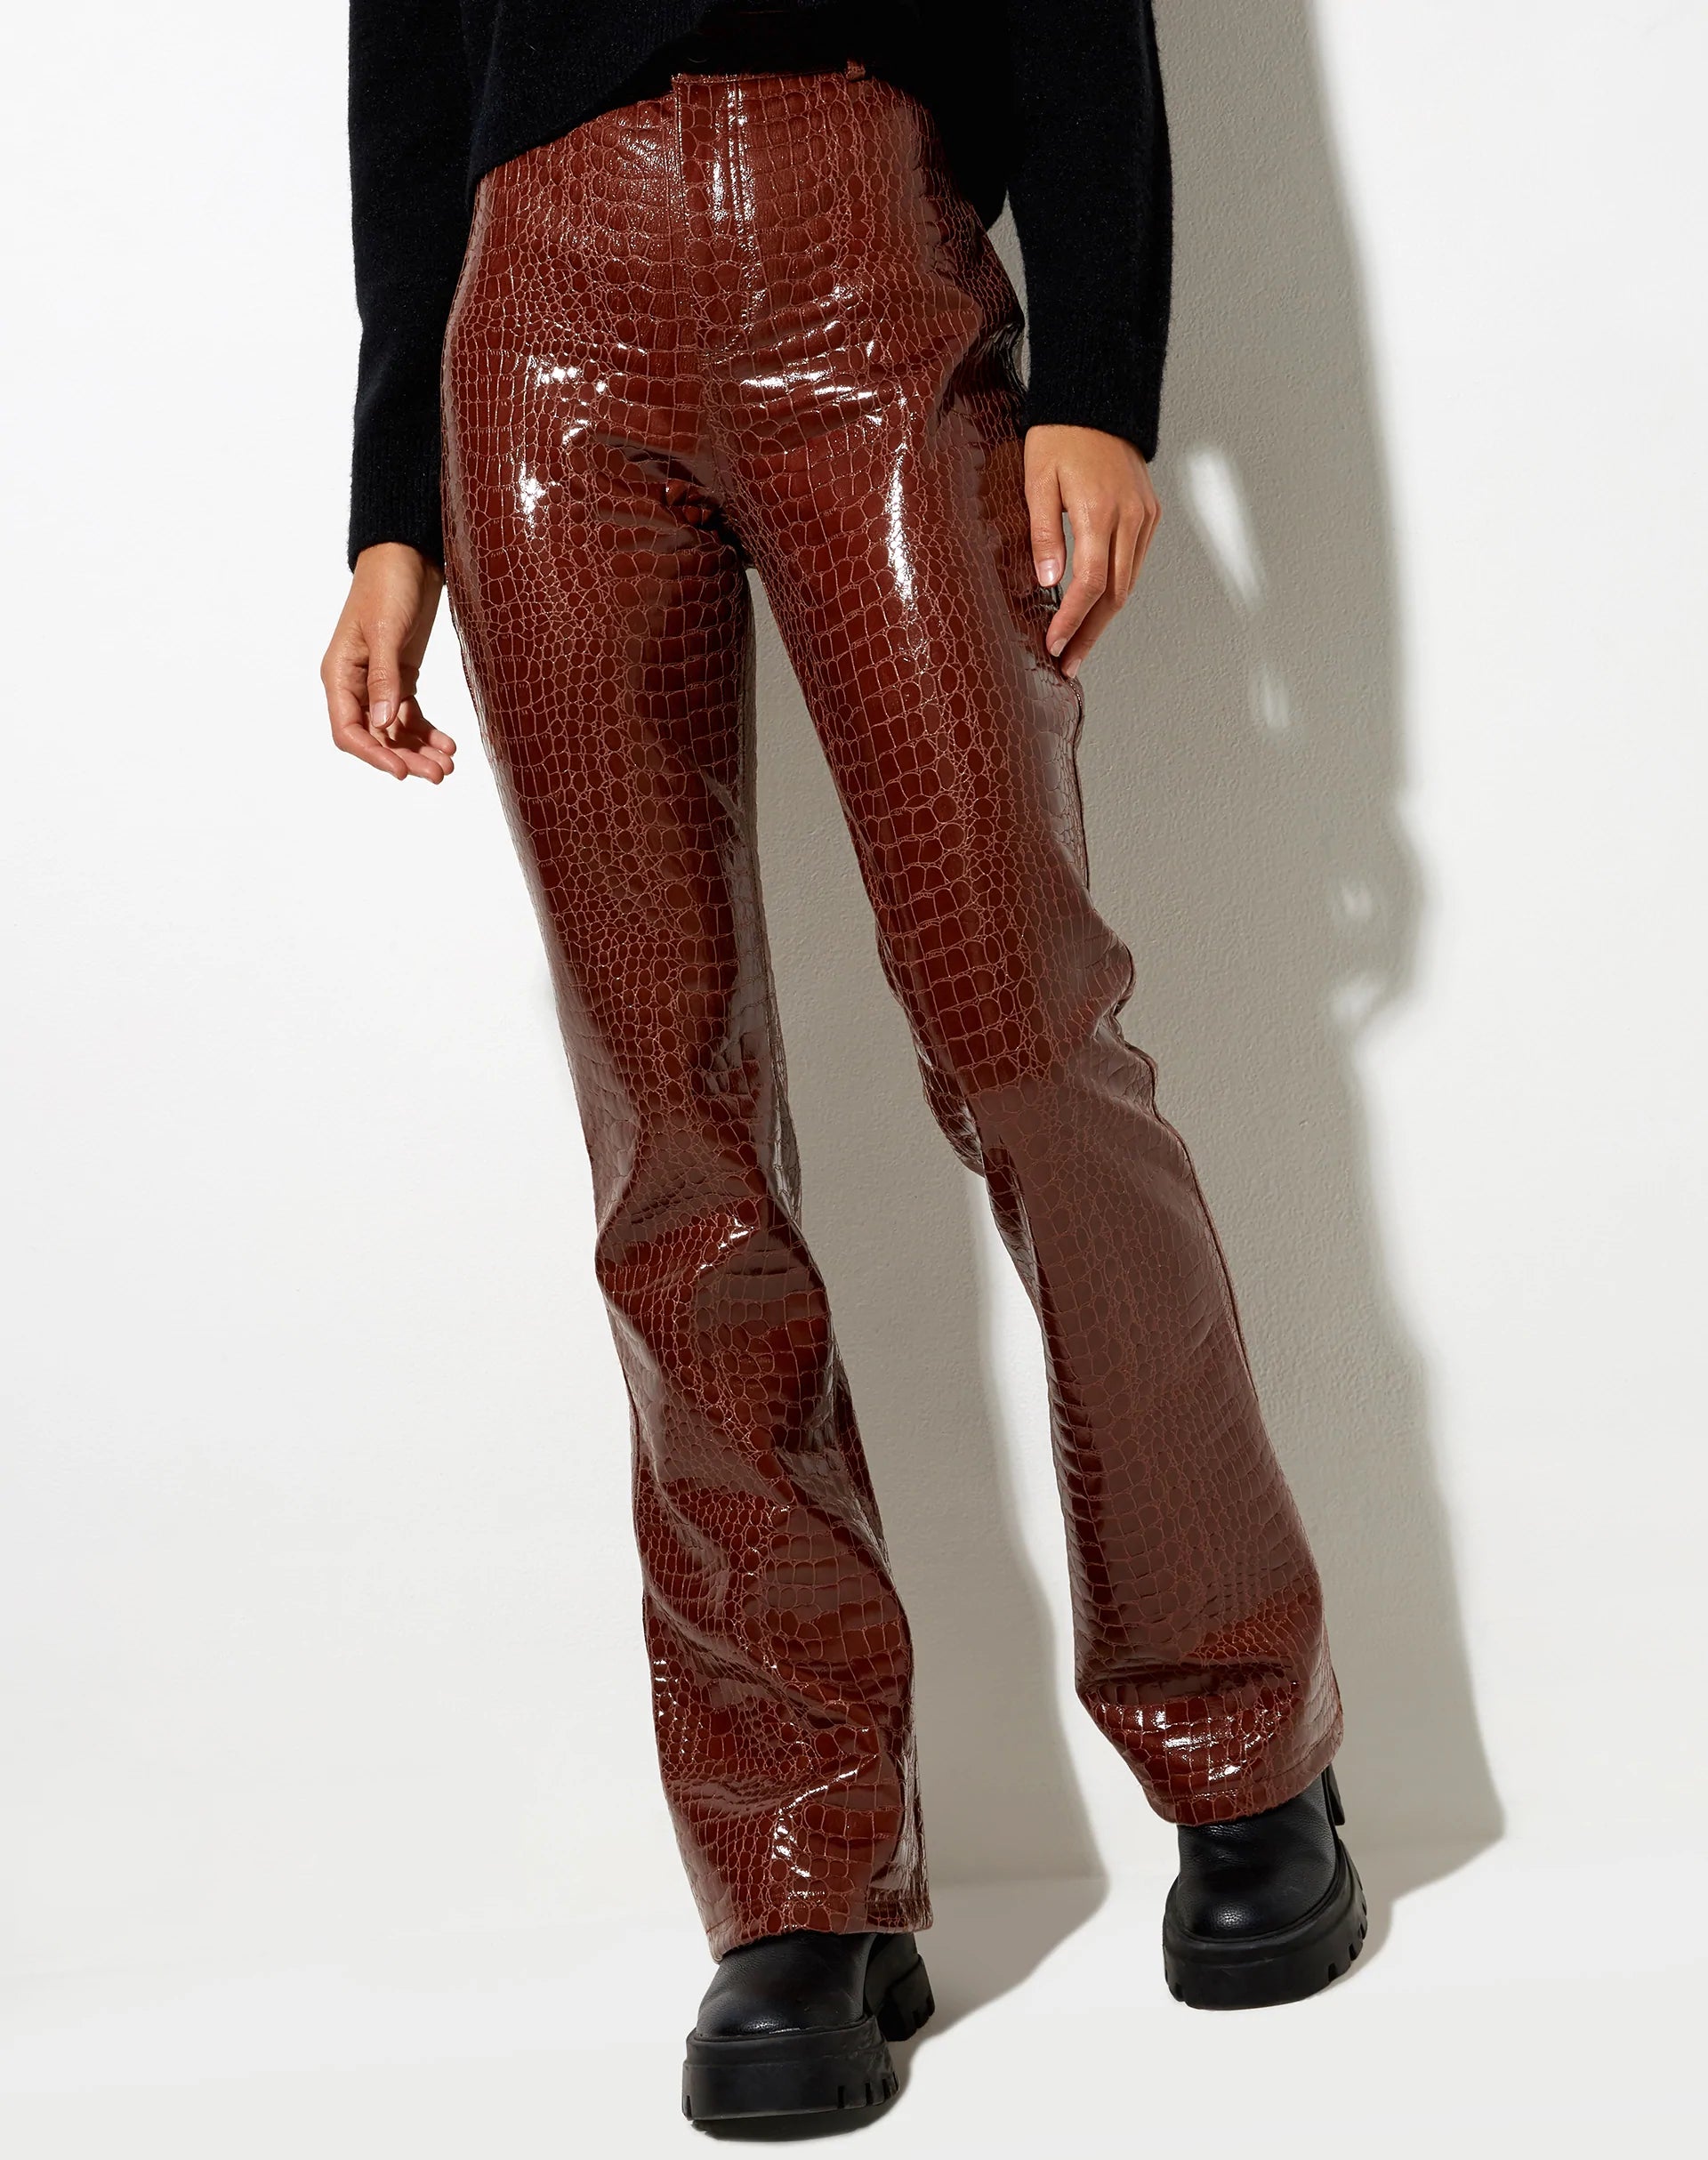 Image of Zoven Flare Trouser in Croc PU Brown